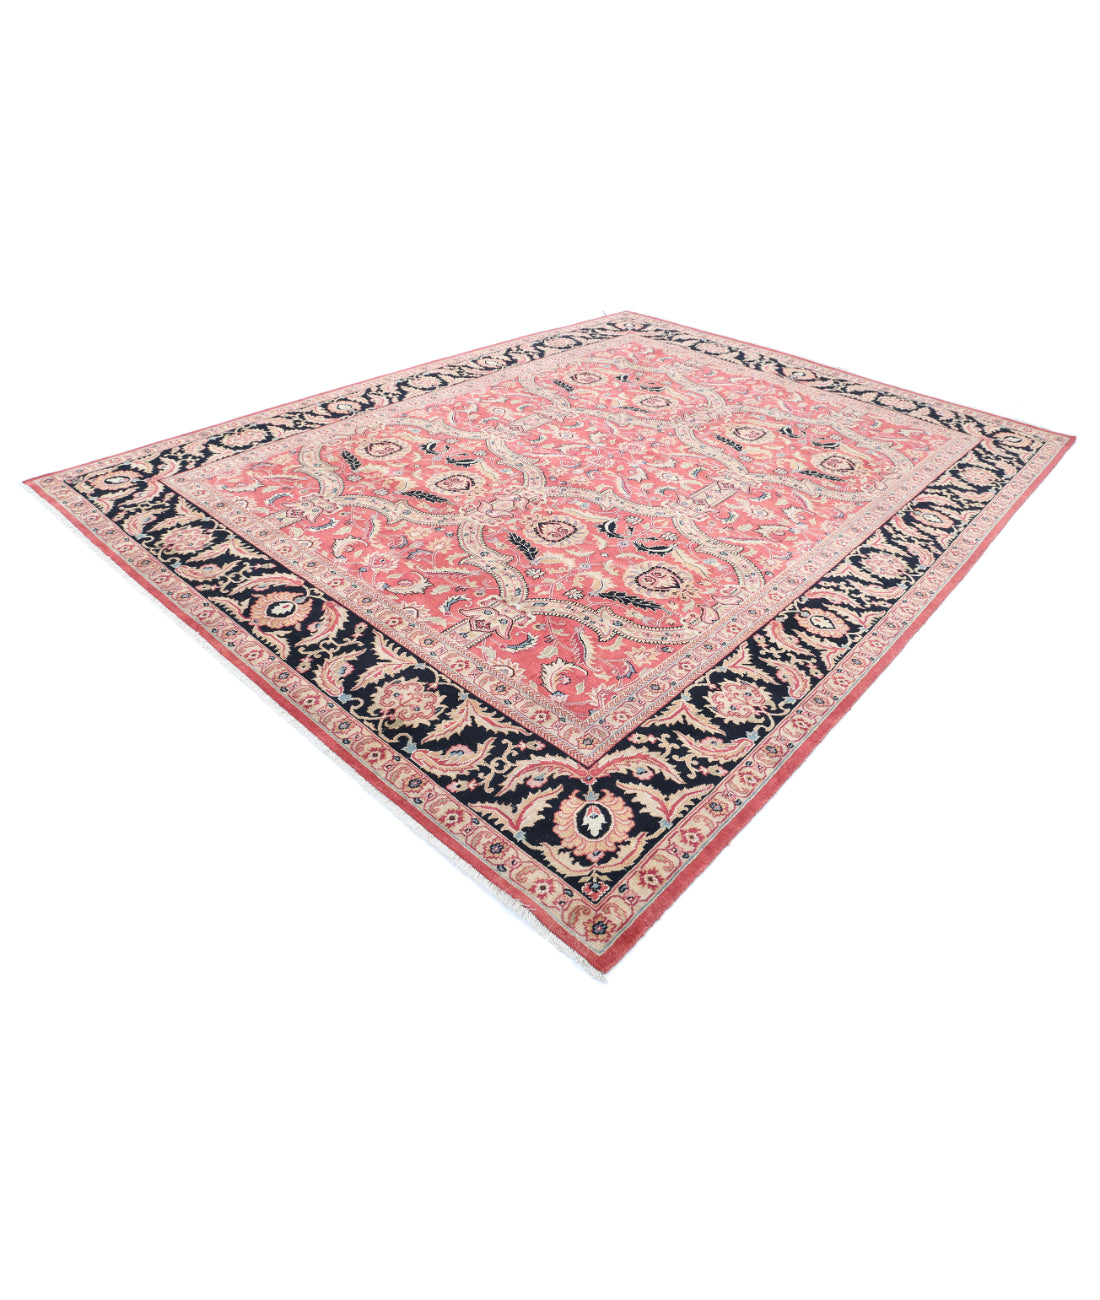 Hand Knotted Agra Wool Rug - 9'5'' x 12'5'' 9'5'' x 12'5'' (75 X 580) / Red / Black